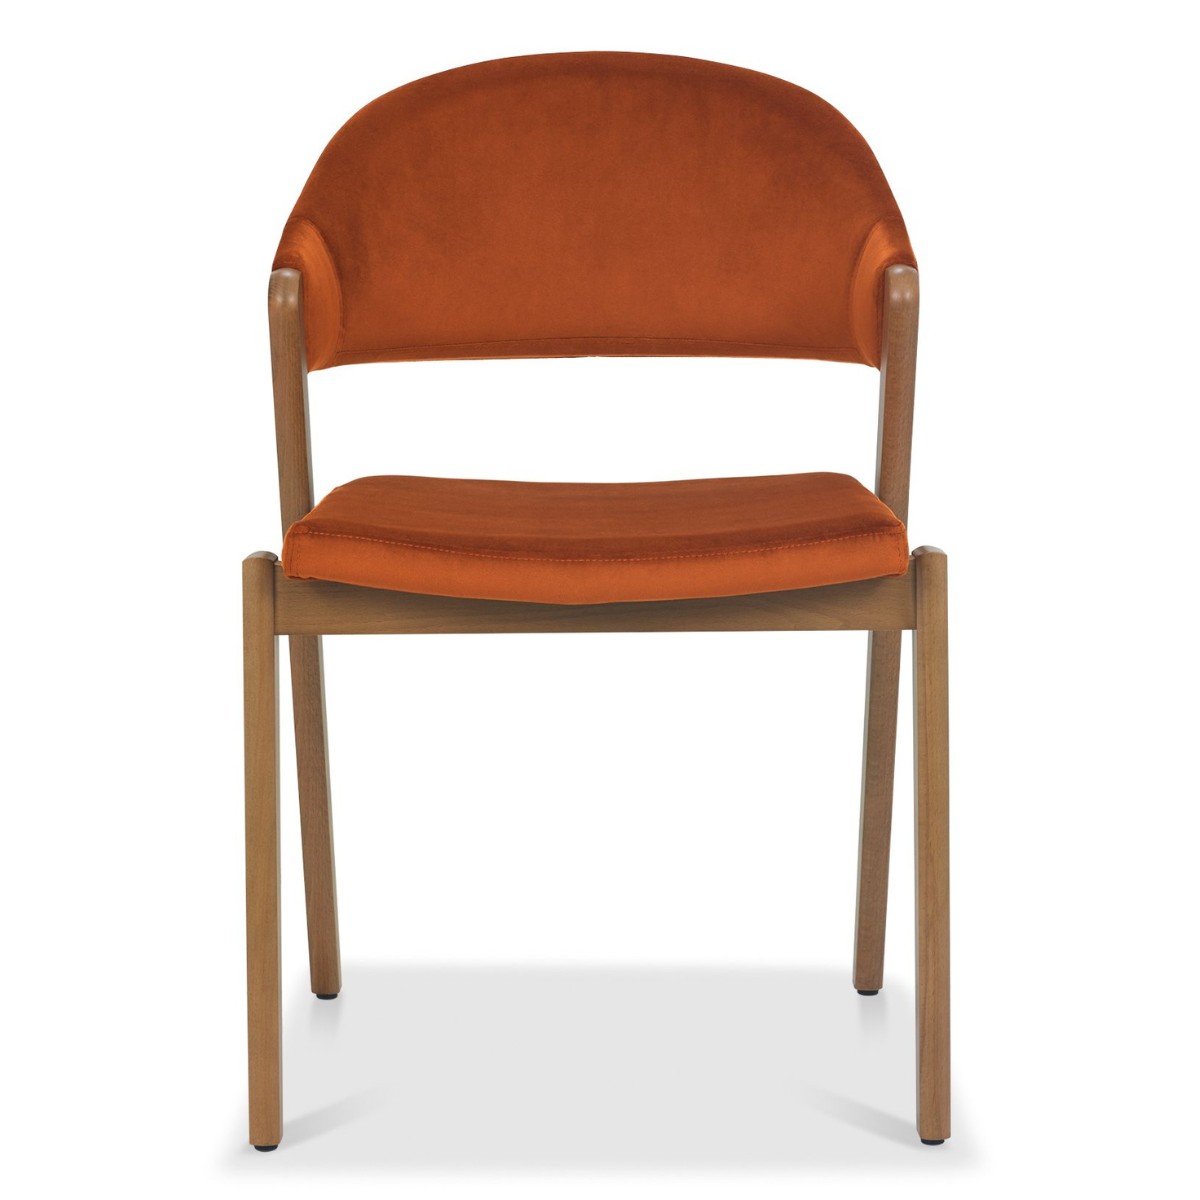 Chambery Rustic Oak Upholstered Dining Chair Orange - 2